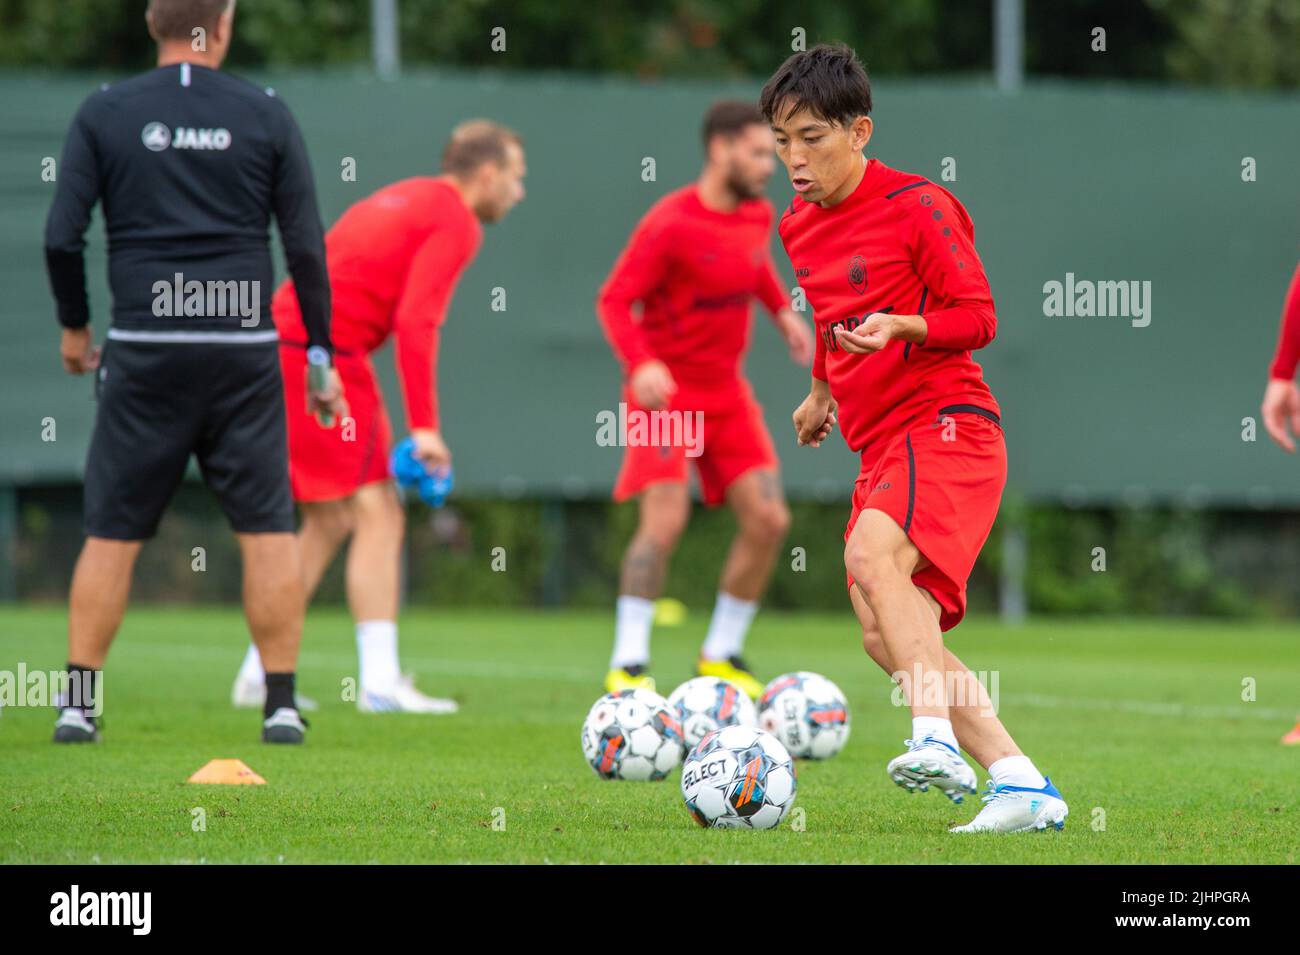 Antwerp, Belgium, 20 July 2022, Antwerp's Koji Miyoshi plays the ball during a training session of Belgian soccer club Royal Antwerp FC, Wednesday 20 July 2022 in Antwerp, in preparation of tomorrow's match against Kosovar FC Drita, the first leg of the second qualifying round for the UEFA Europa Conference League. BELGA PHOTO JONAS ROOSENS Stock Photo